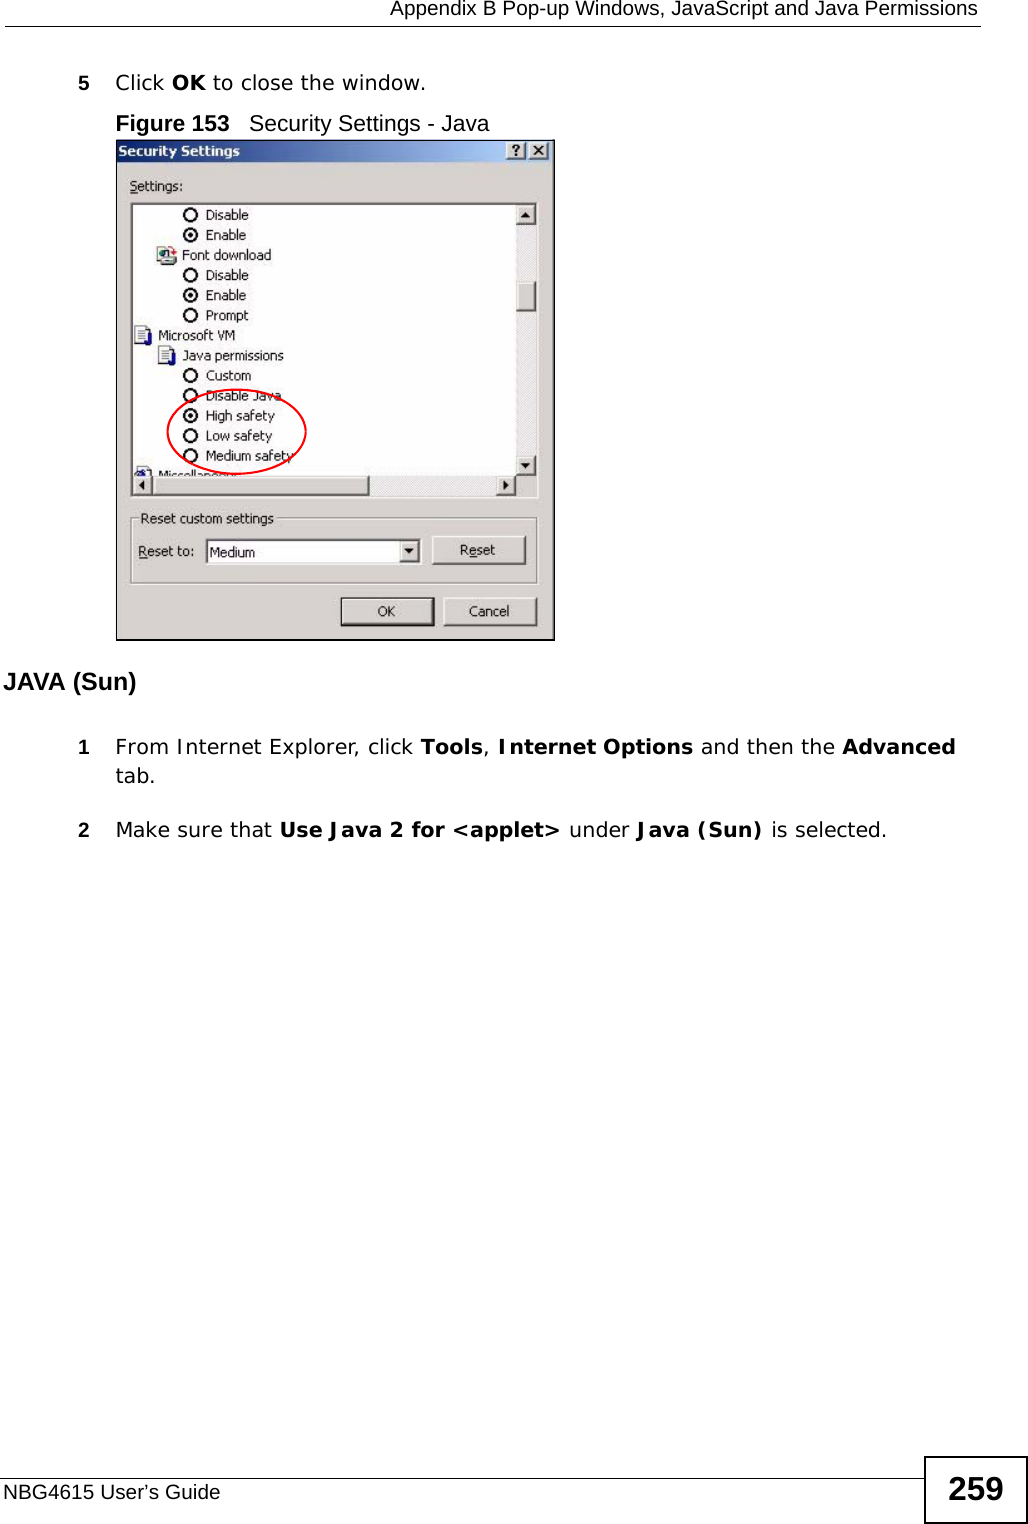  Appendix B Pop-up Windows, JavaScript and Java PermissionsNBG4615 User’s Guide 2595Click OK to close the window.Figure 153   Security Settings - Java JAVA (Sun)1From Internet Explorer, click Tools, Internet Options and then the Advanced tab. 2Make sure that Use Java 2 for &lt;applet&gt; under Java (Sun) is selected.